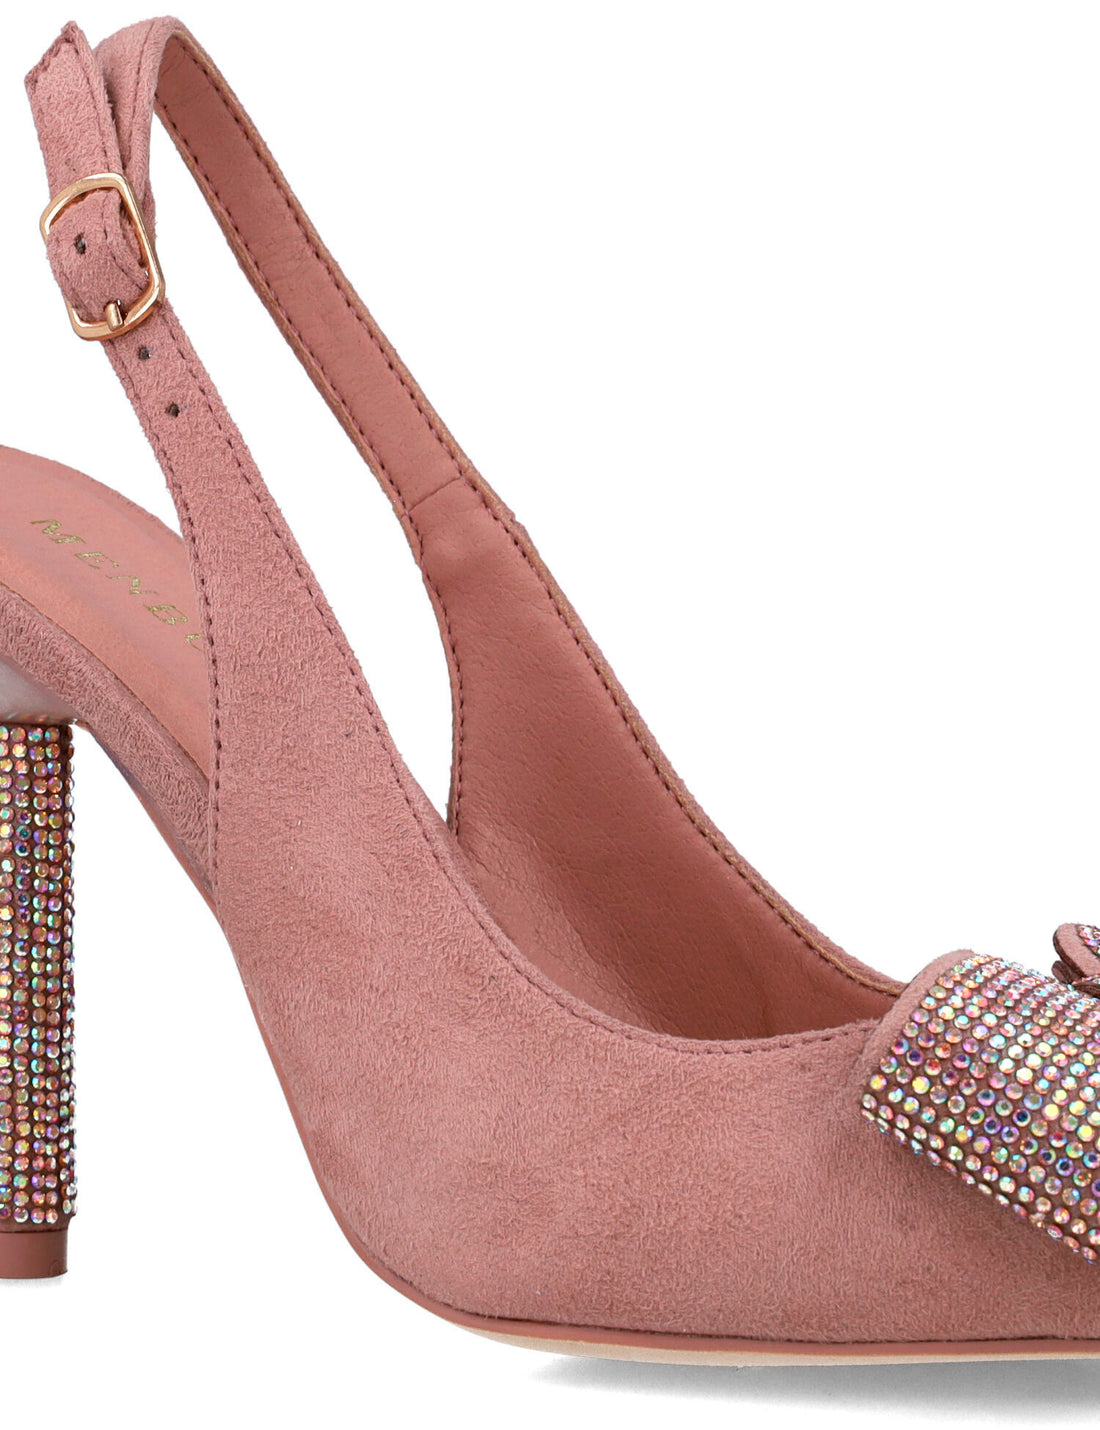 Pink Slingback Pumps With Embellished Bow_25445_97_02